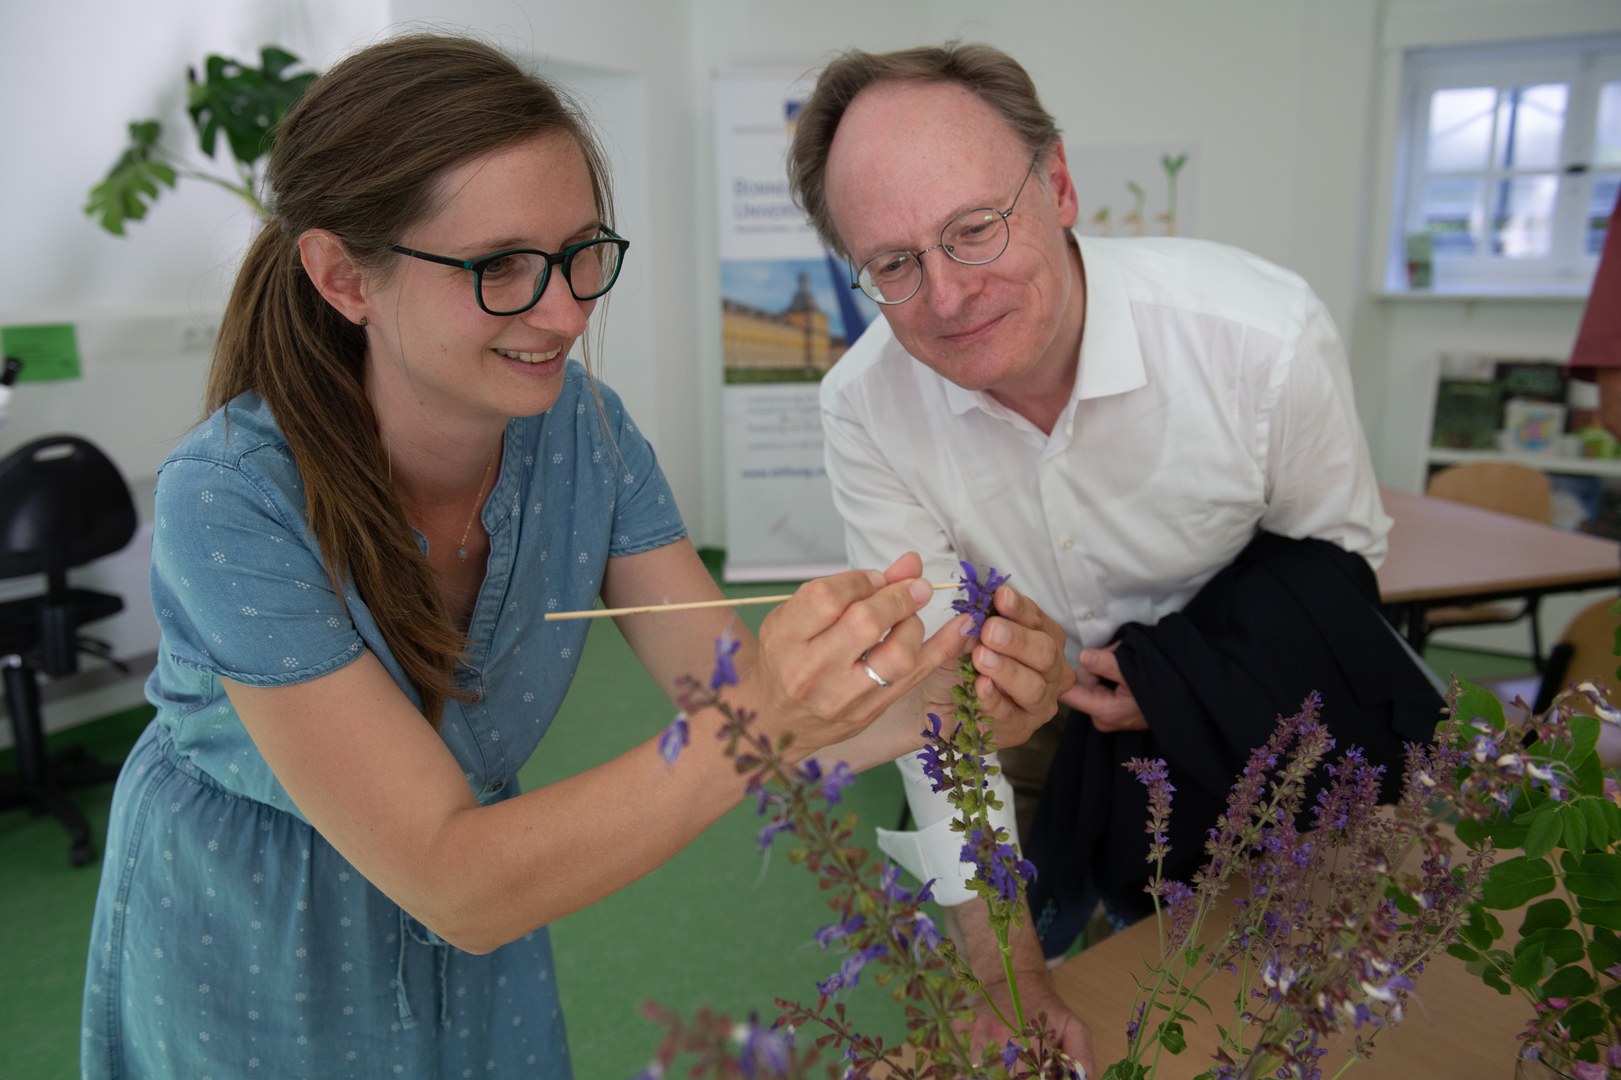 Identifying plants: Lisabeth Hoff from the learning workshop and Prof. Dr. Rainer Hüttemann test out the equipment and offerings